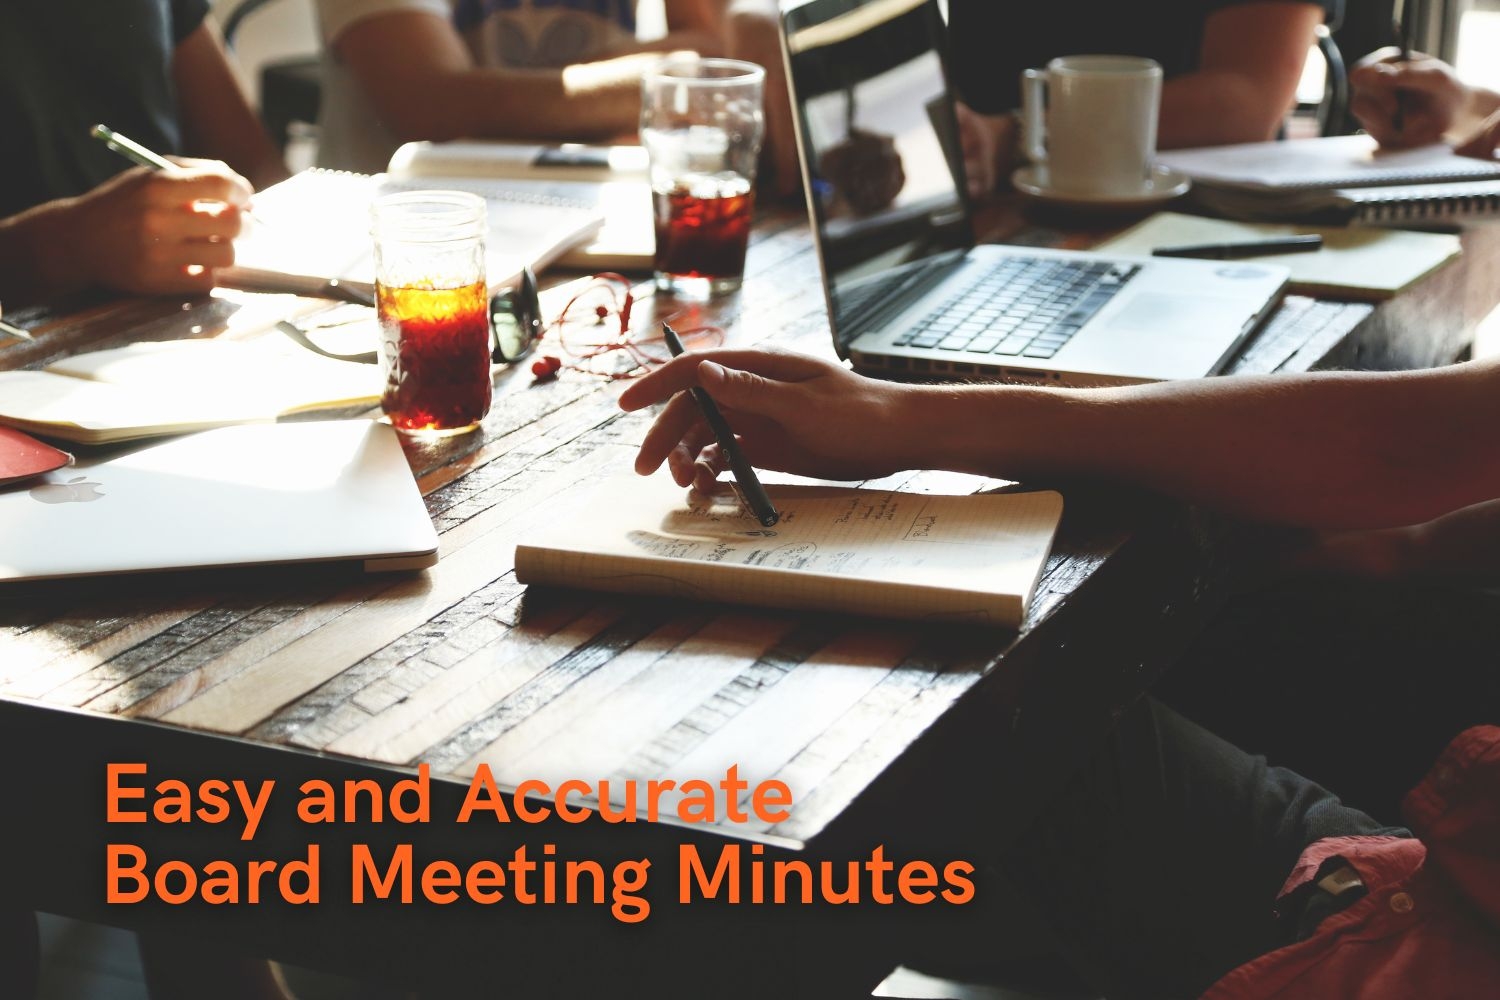 What should be included in board meeting minutes? 